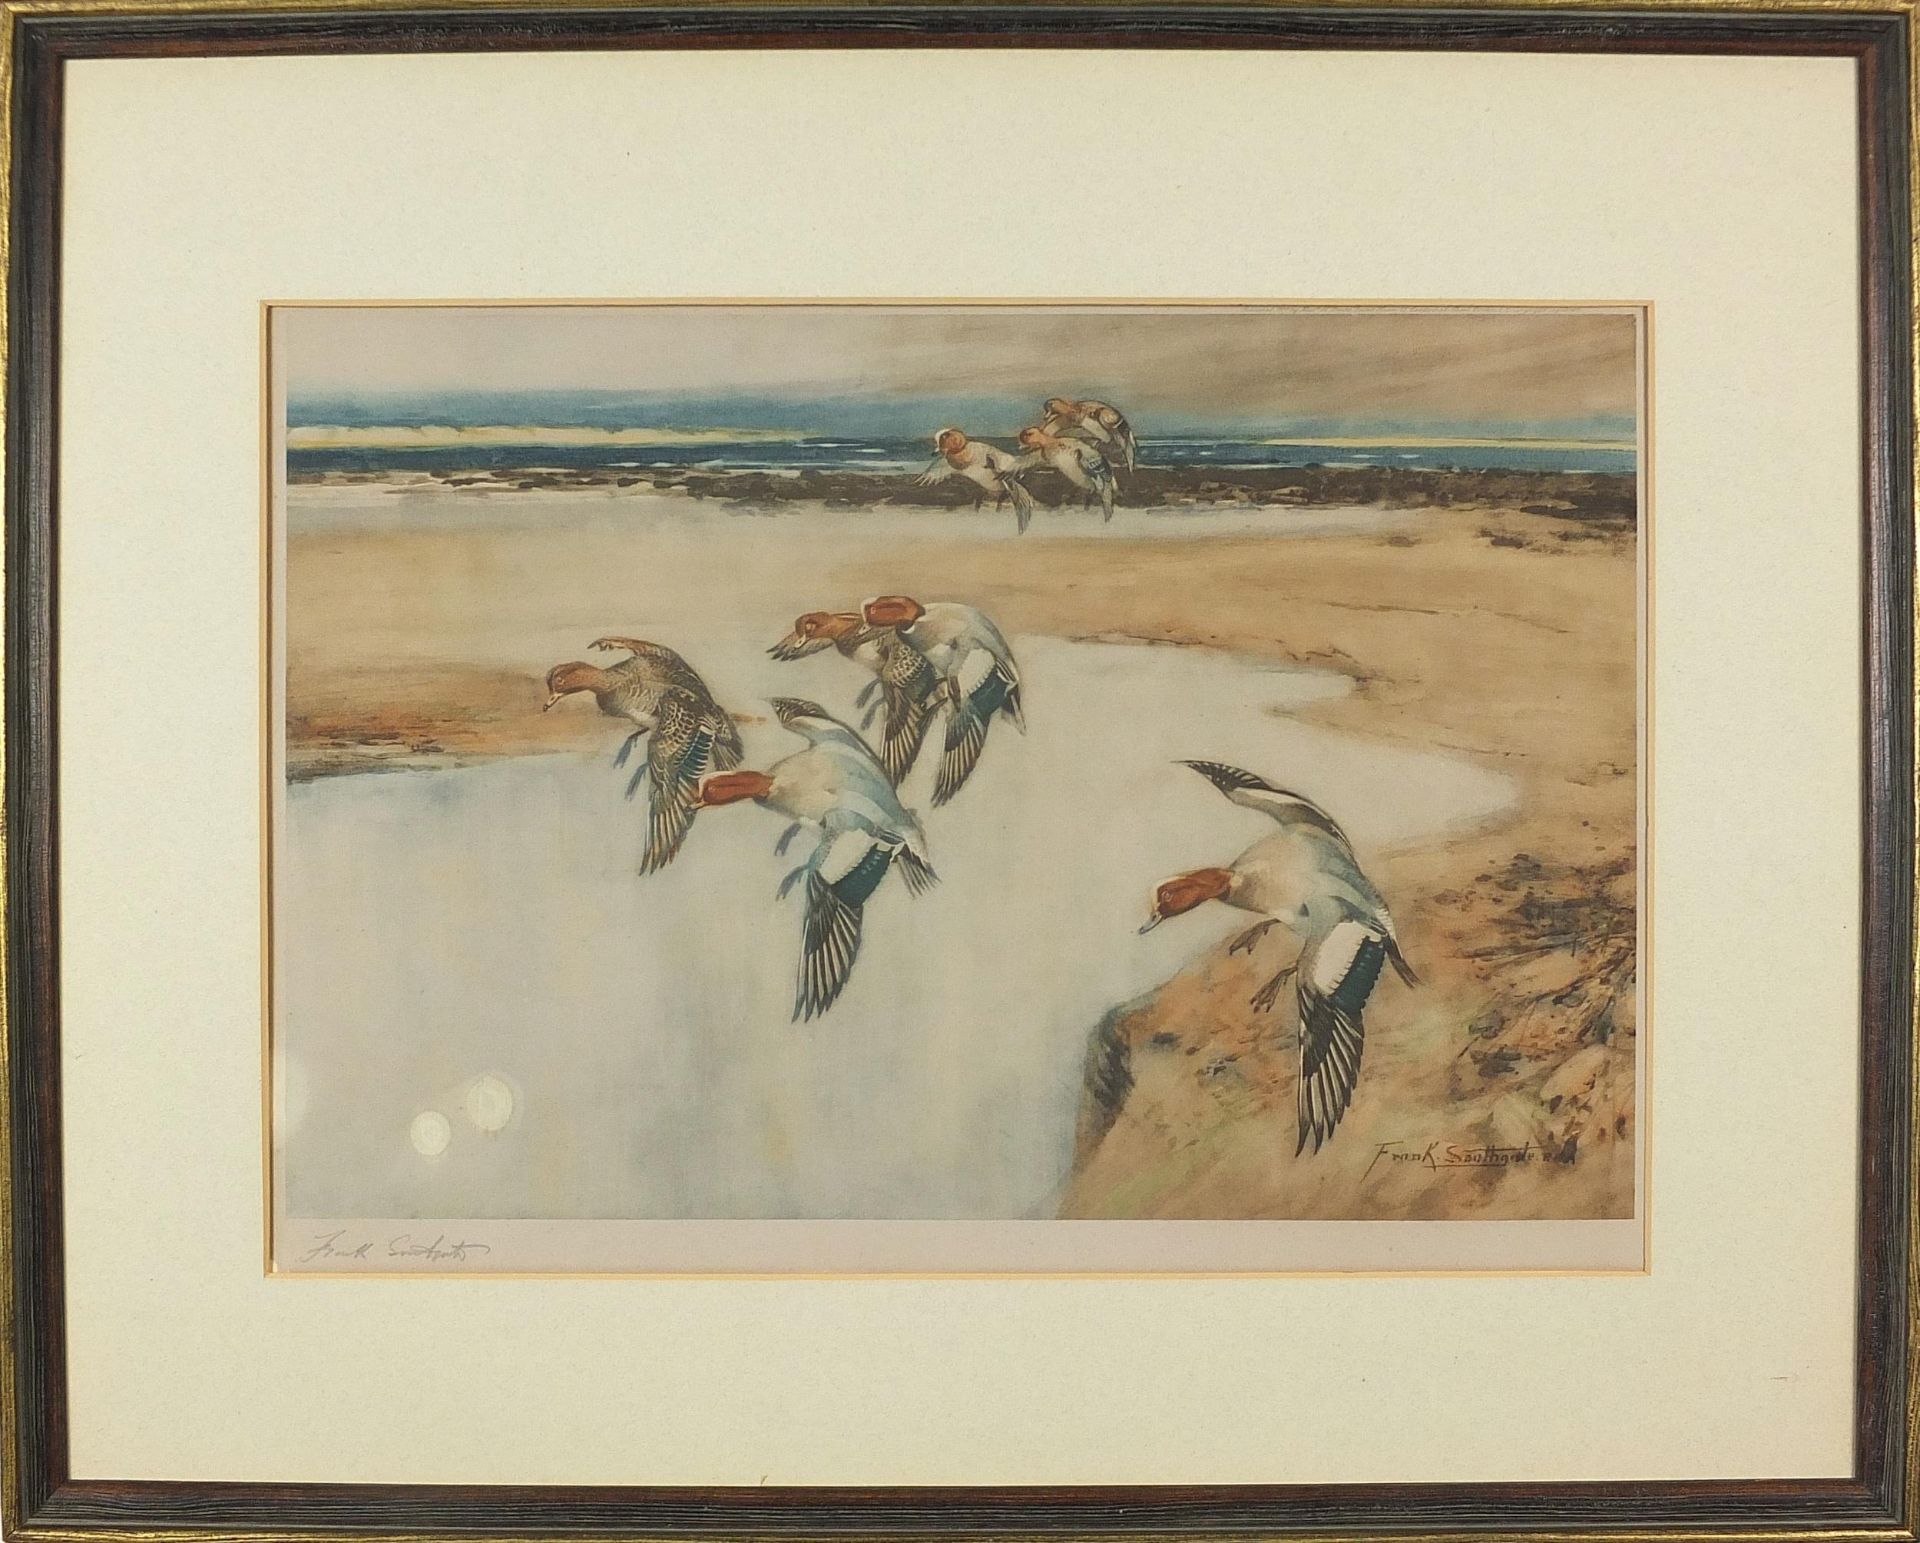 Frank Southgate - Game birds, pencil signed lithograph in colour, mounted and framed, 46cm x 32cm - Image 2 of 6